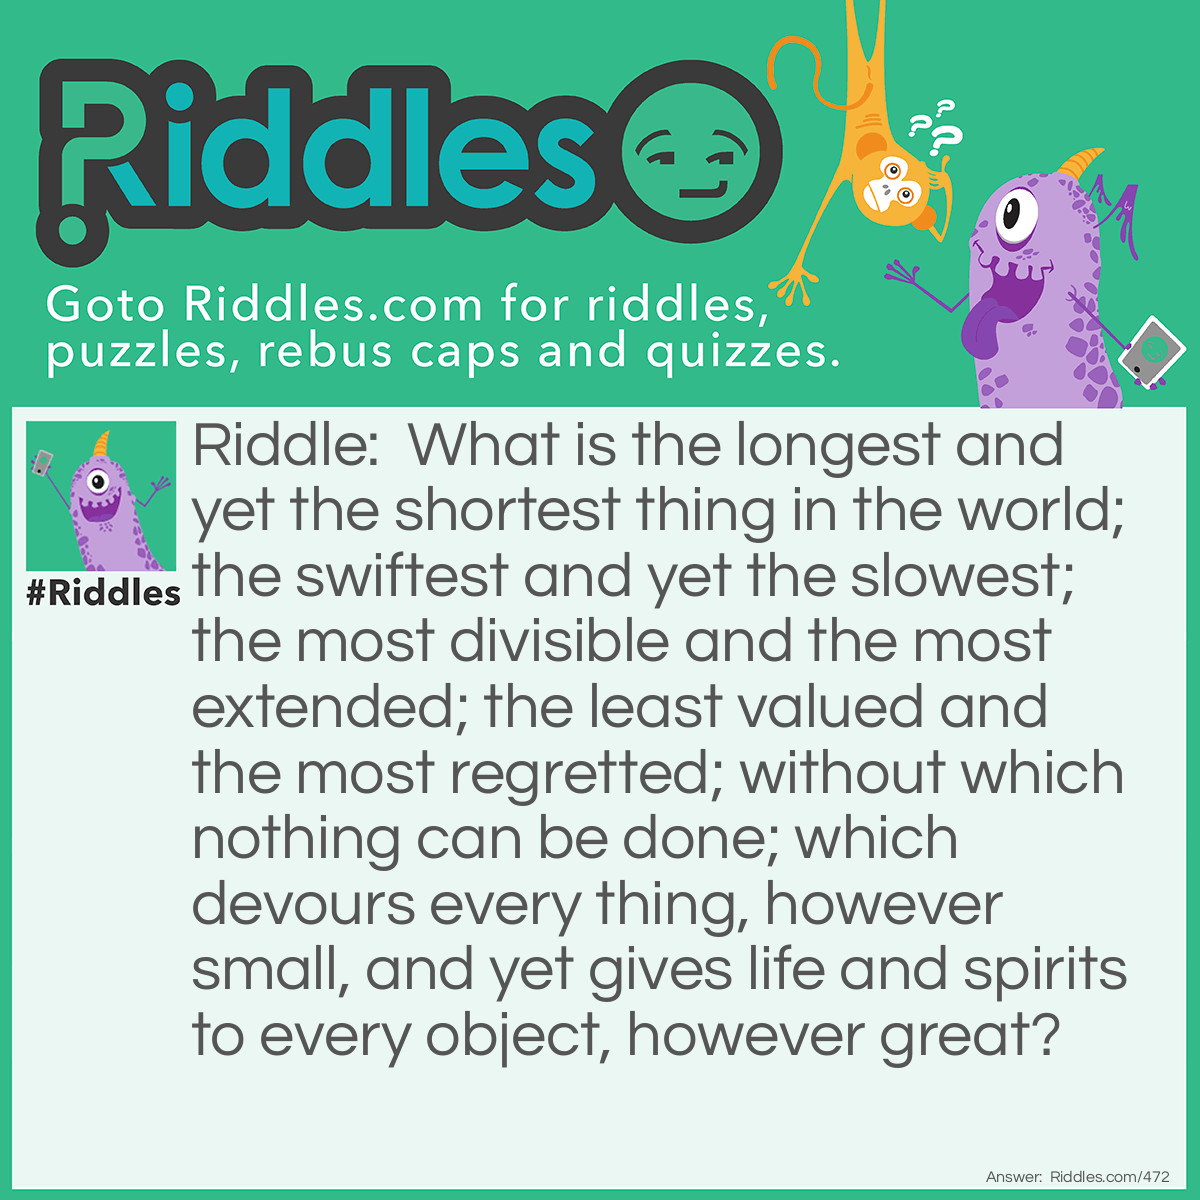 Riddle: What is the longest and yet the shortest thing in the world; the swiftest and yet the slowest; the most divisible and the most extended; the least valued and the most regretted; without which nothing can be done; which devours every thing, however small, and yet gives life and spirits to every object, however <a href="https://www.riddles.com/best-riddles">great</a>? Answer: Time.